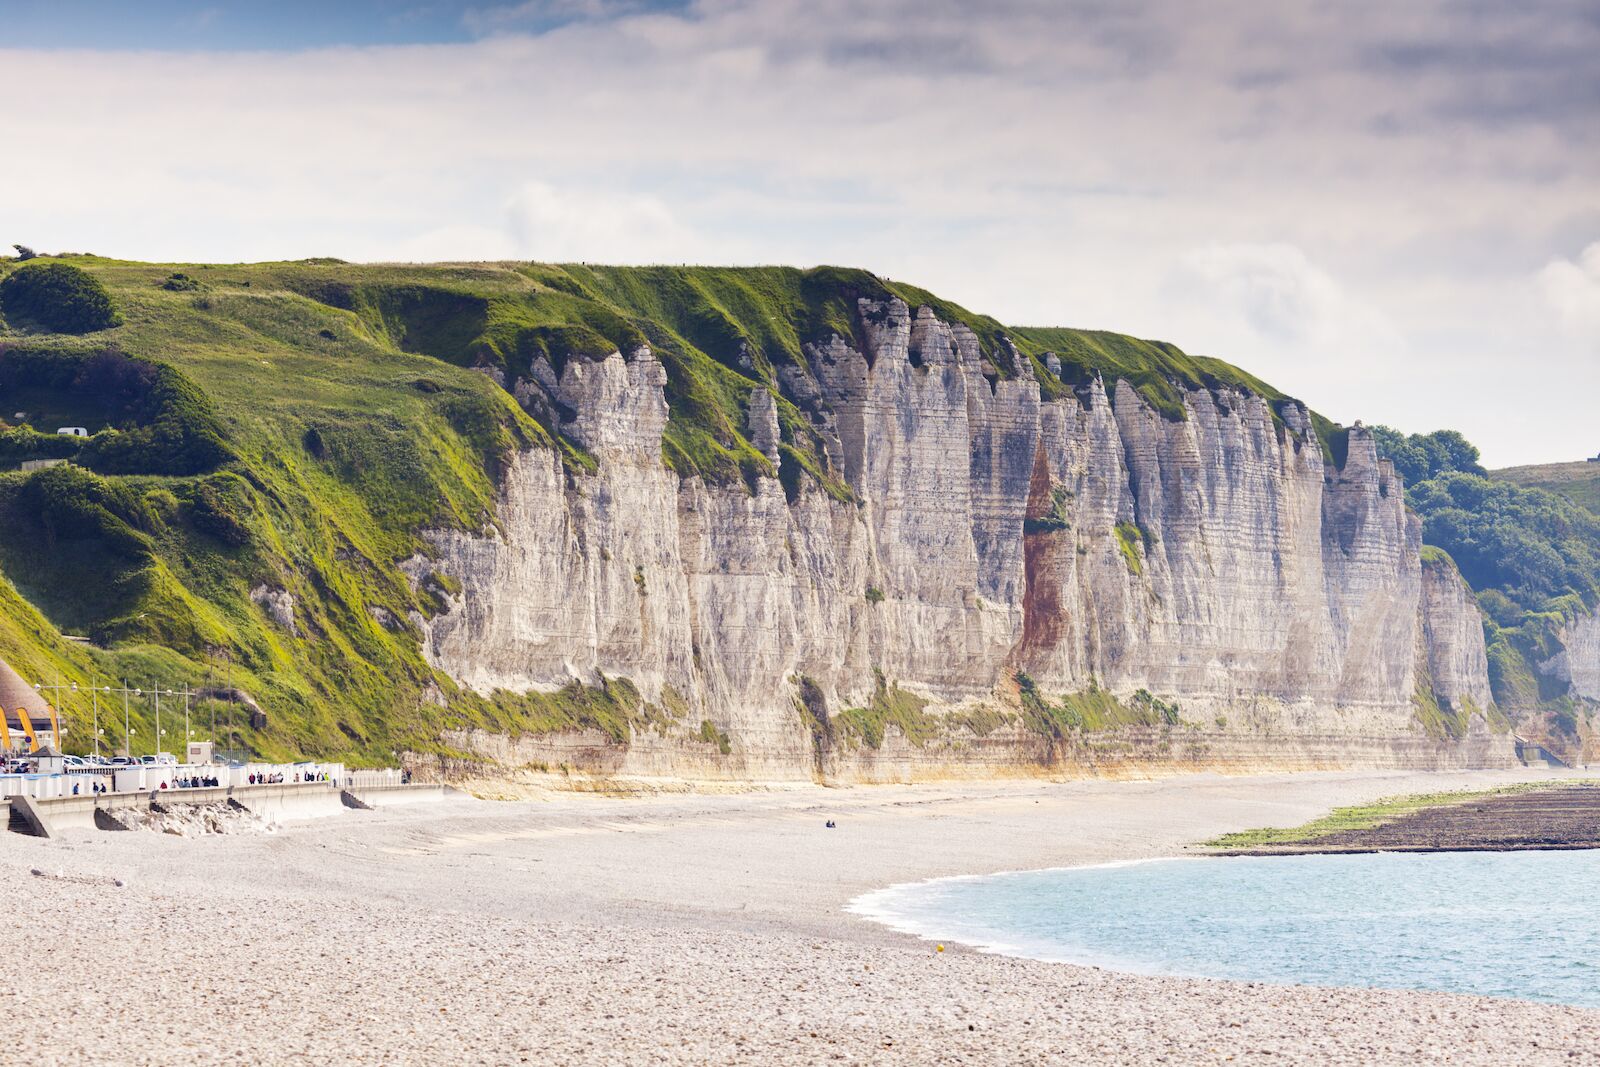 View of the white-chalk cliffs at the plage de Fecamp, one of the best French beaches